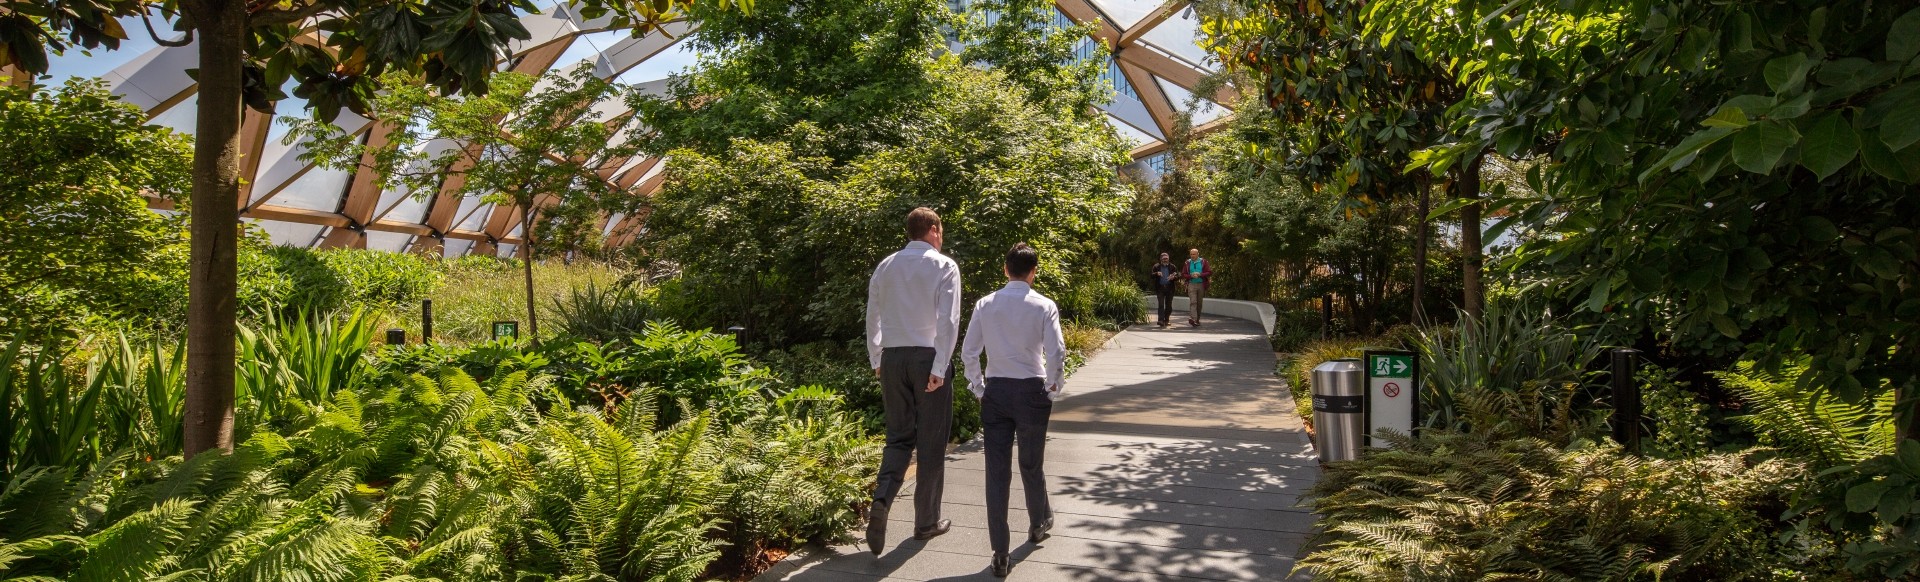 Two men in dark trousers and white shirts walk along a path lined by green plants underneath a glass canopy.